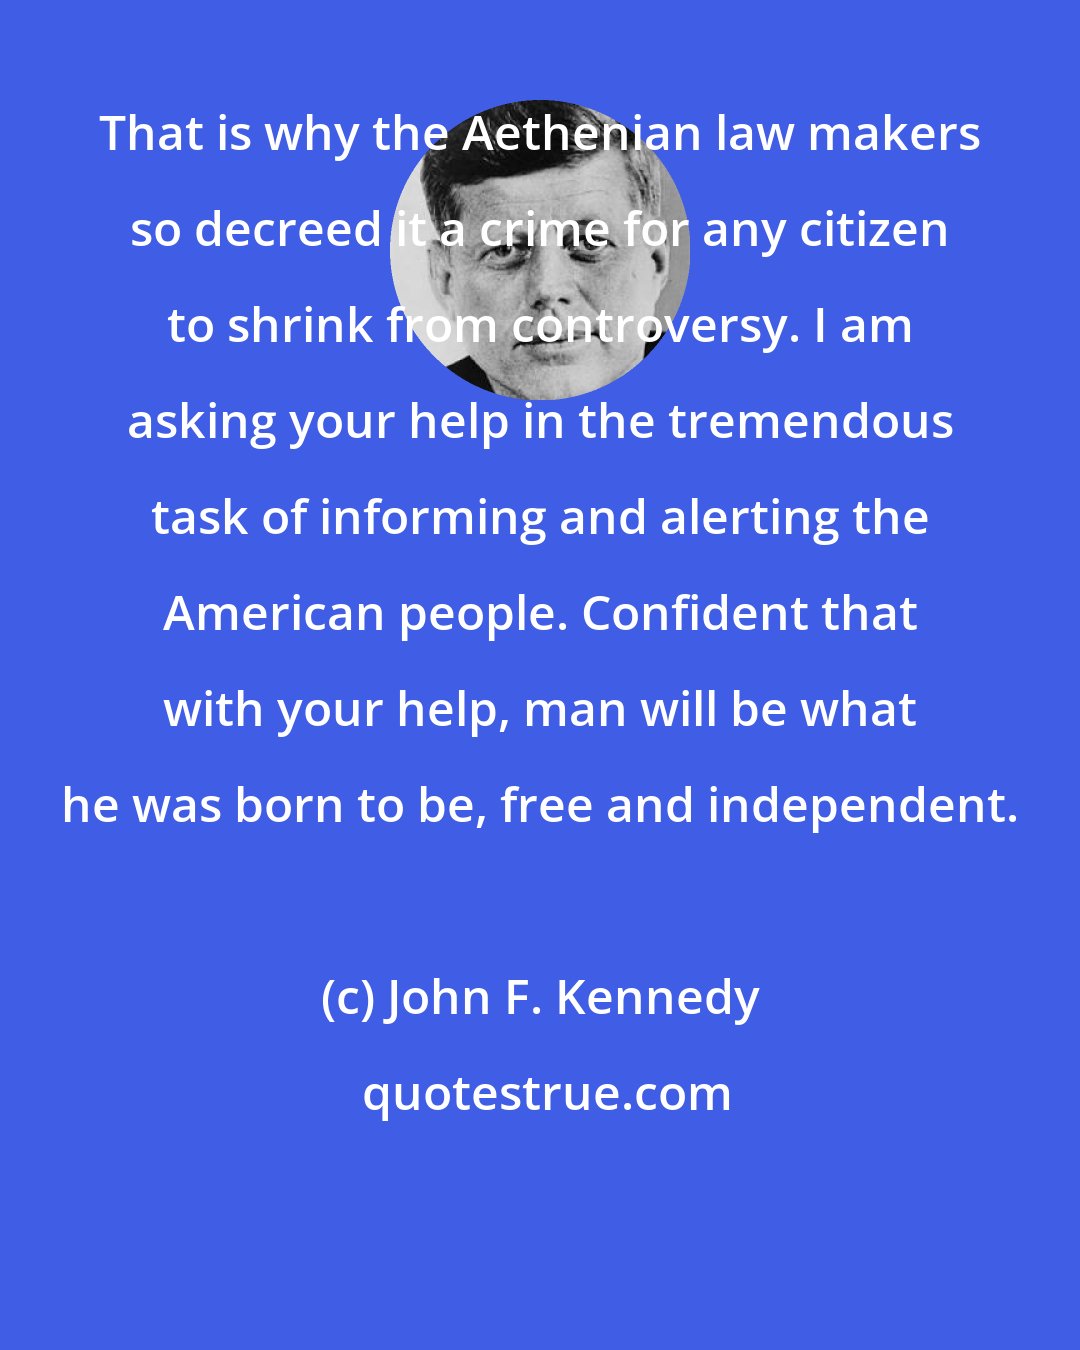 John F. Kennedy: That is why the Aethenian law makers so decreed it a crime for any citizen to shrink from controversy. I am asking your help in the tremendous task of informing and alerting the American people. Confident that with your help, man will be what he was born to be, free and independent.